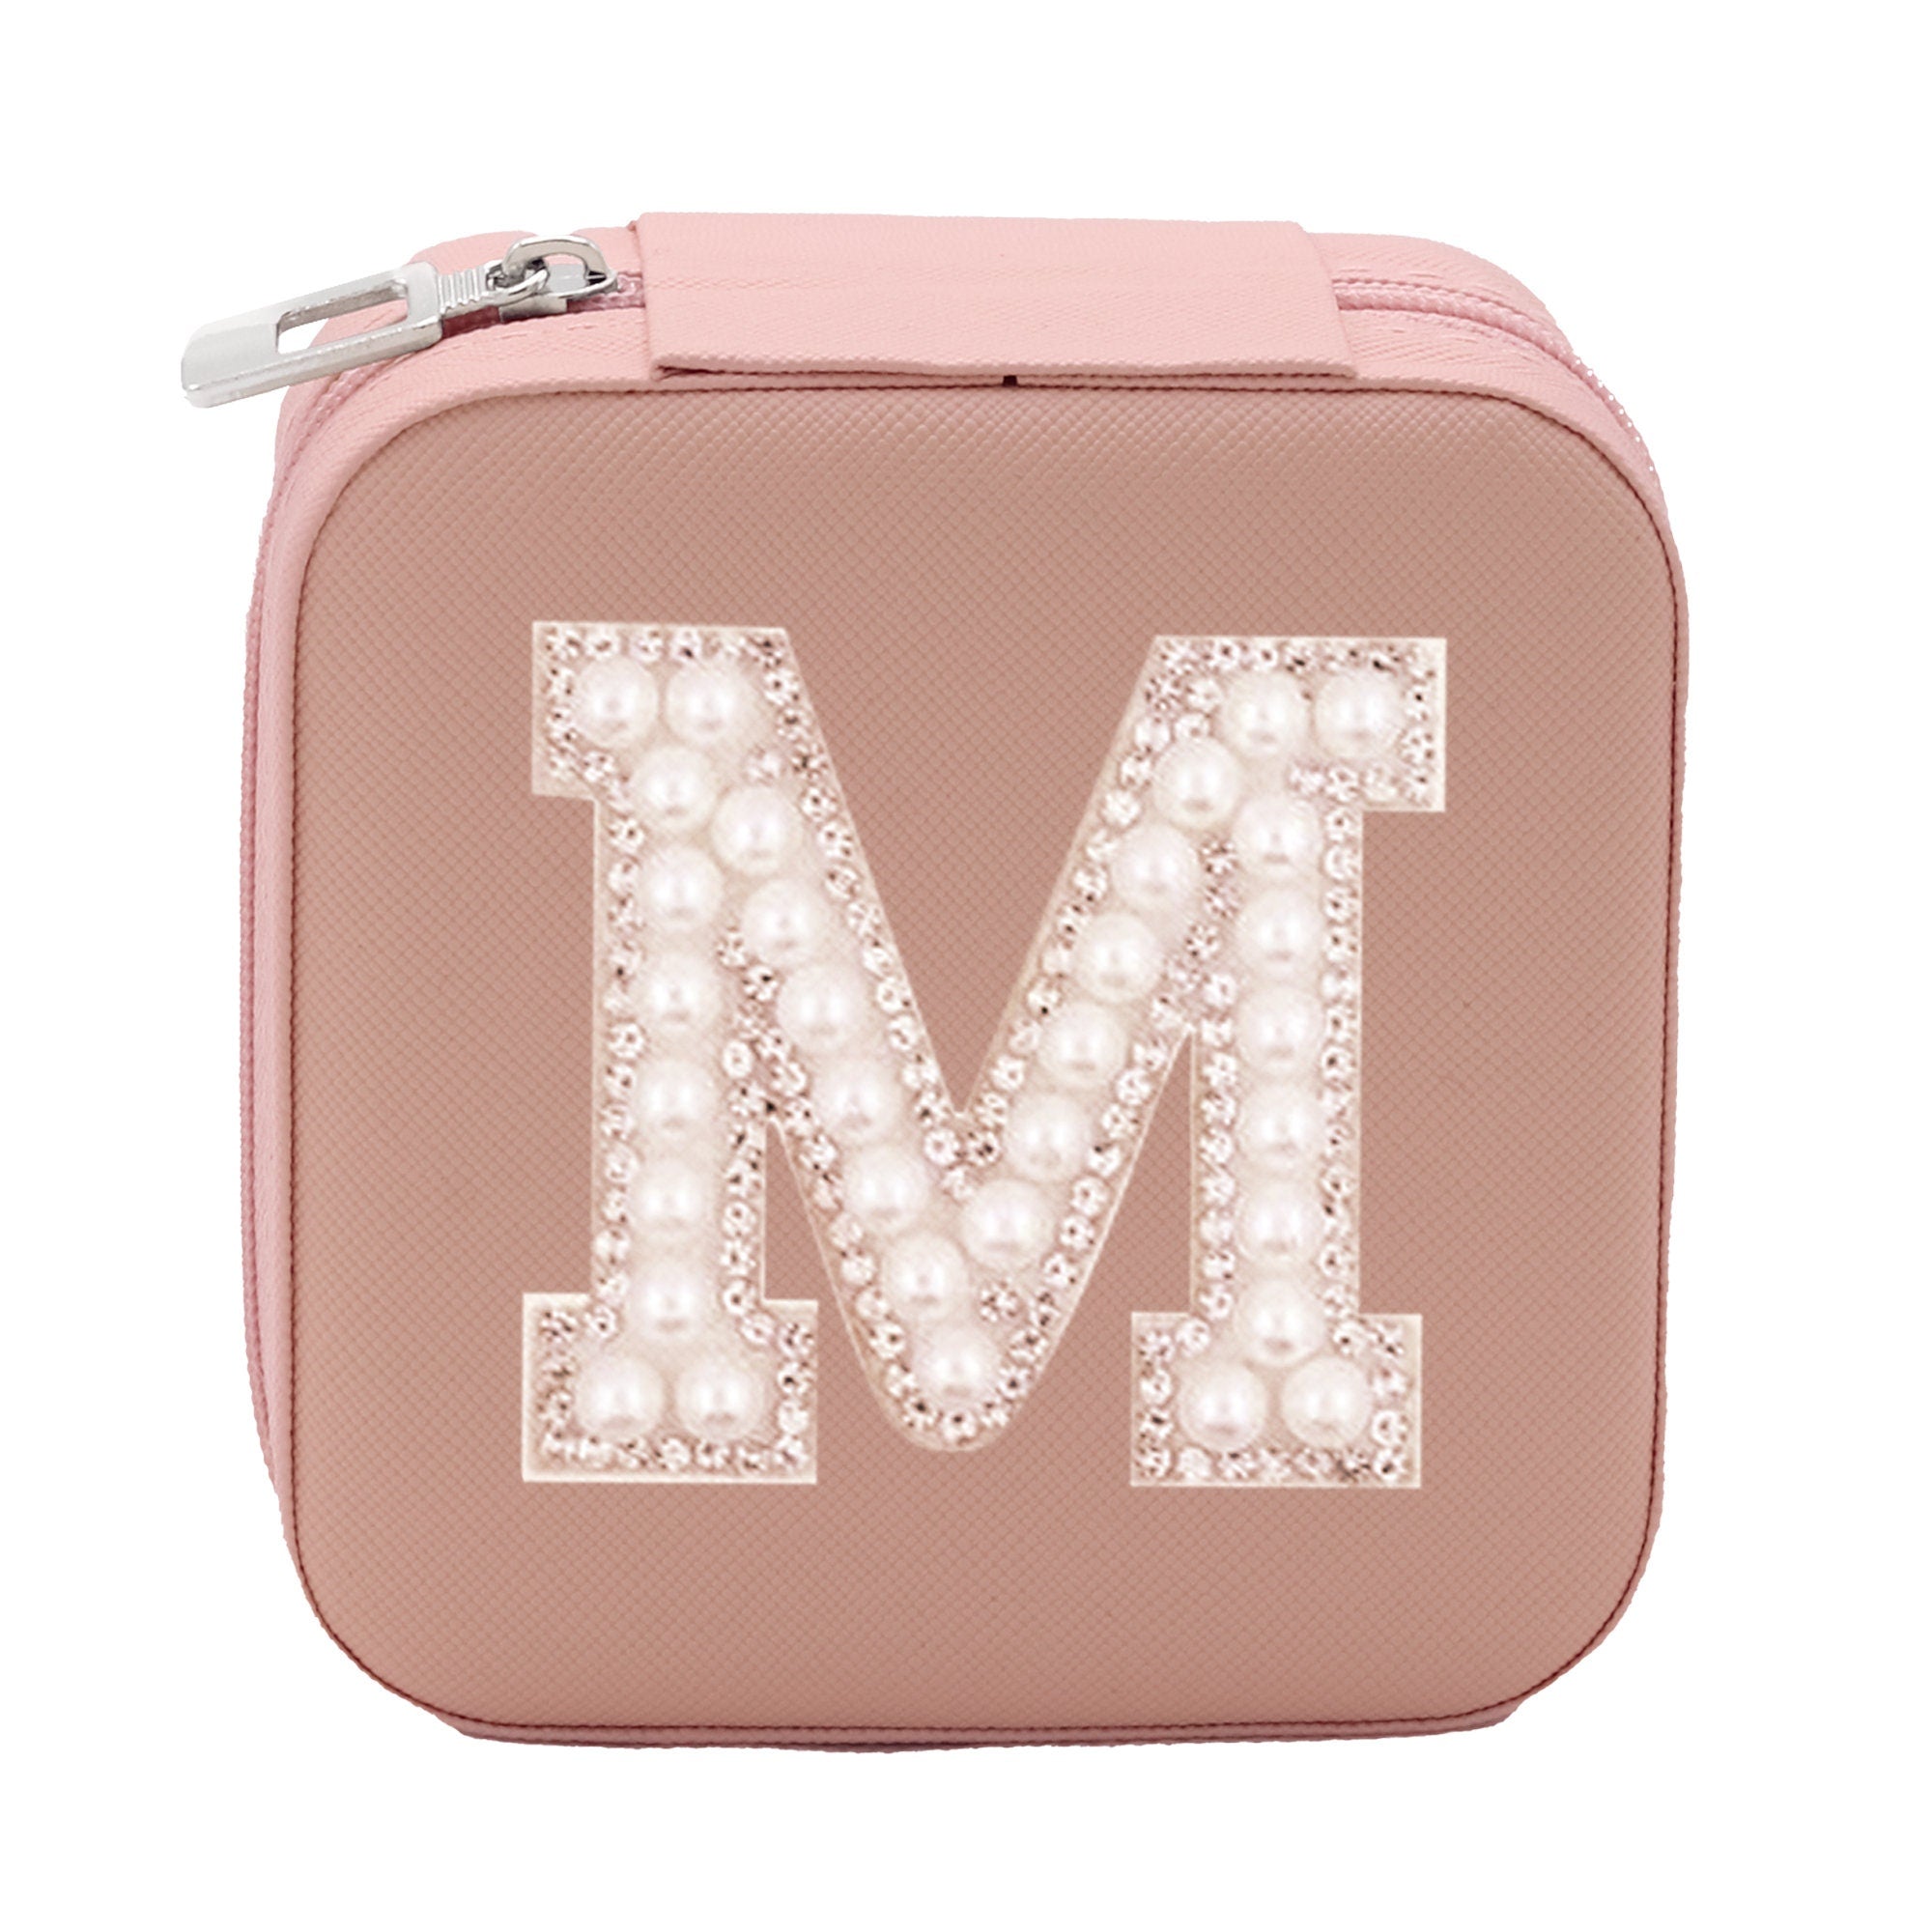 a pink case with a letter m on it